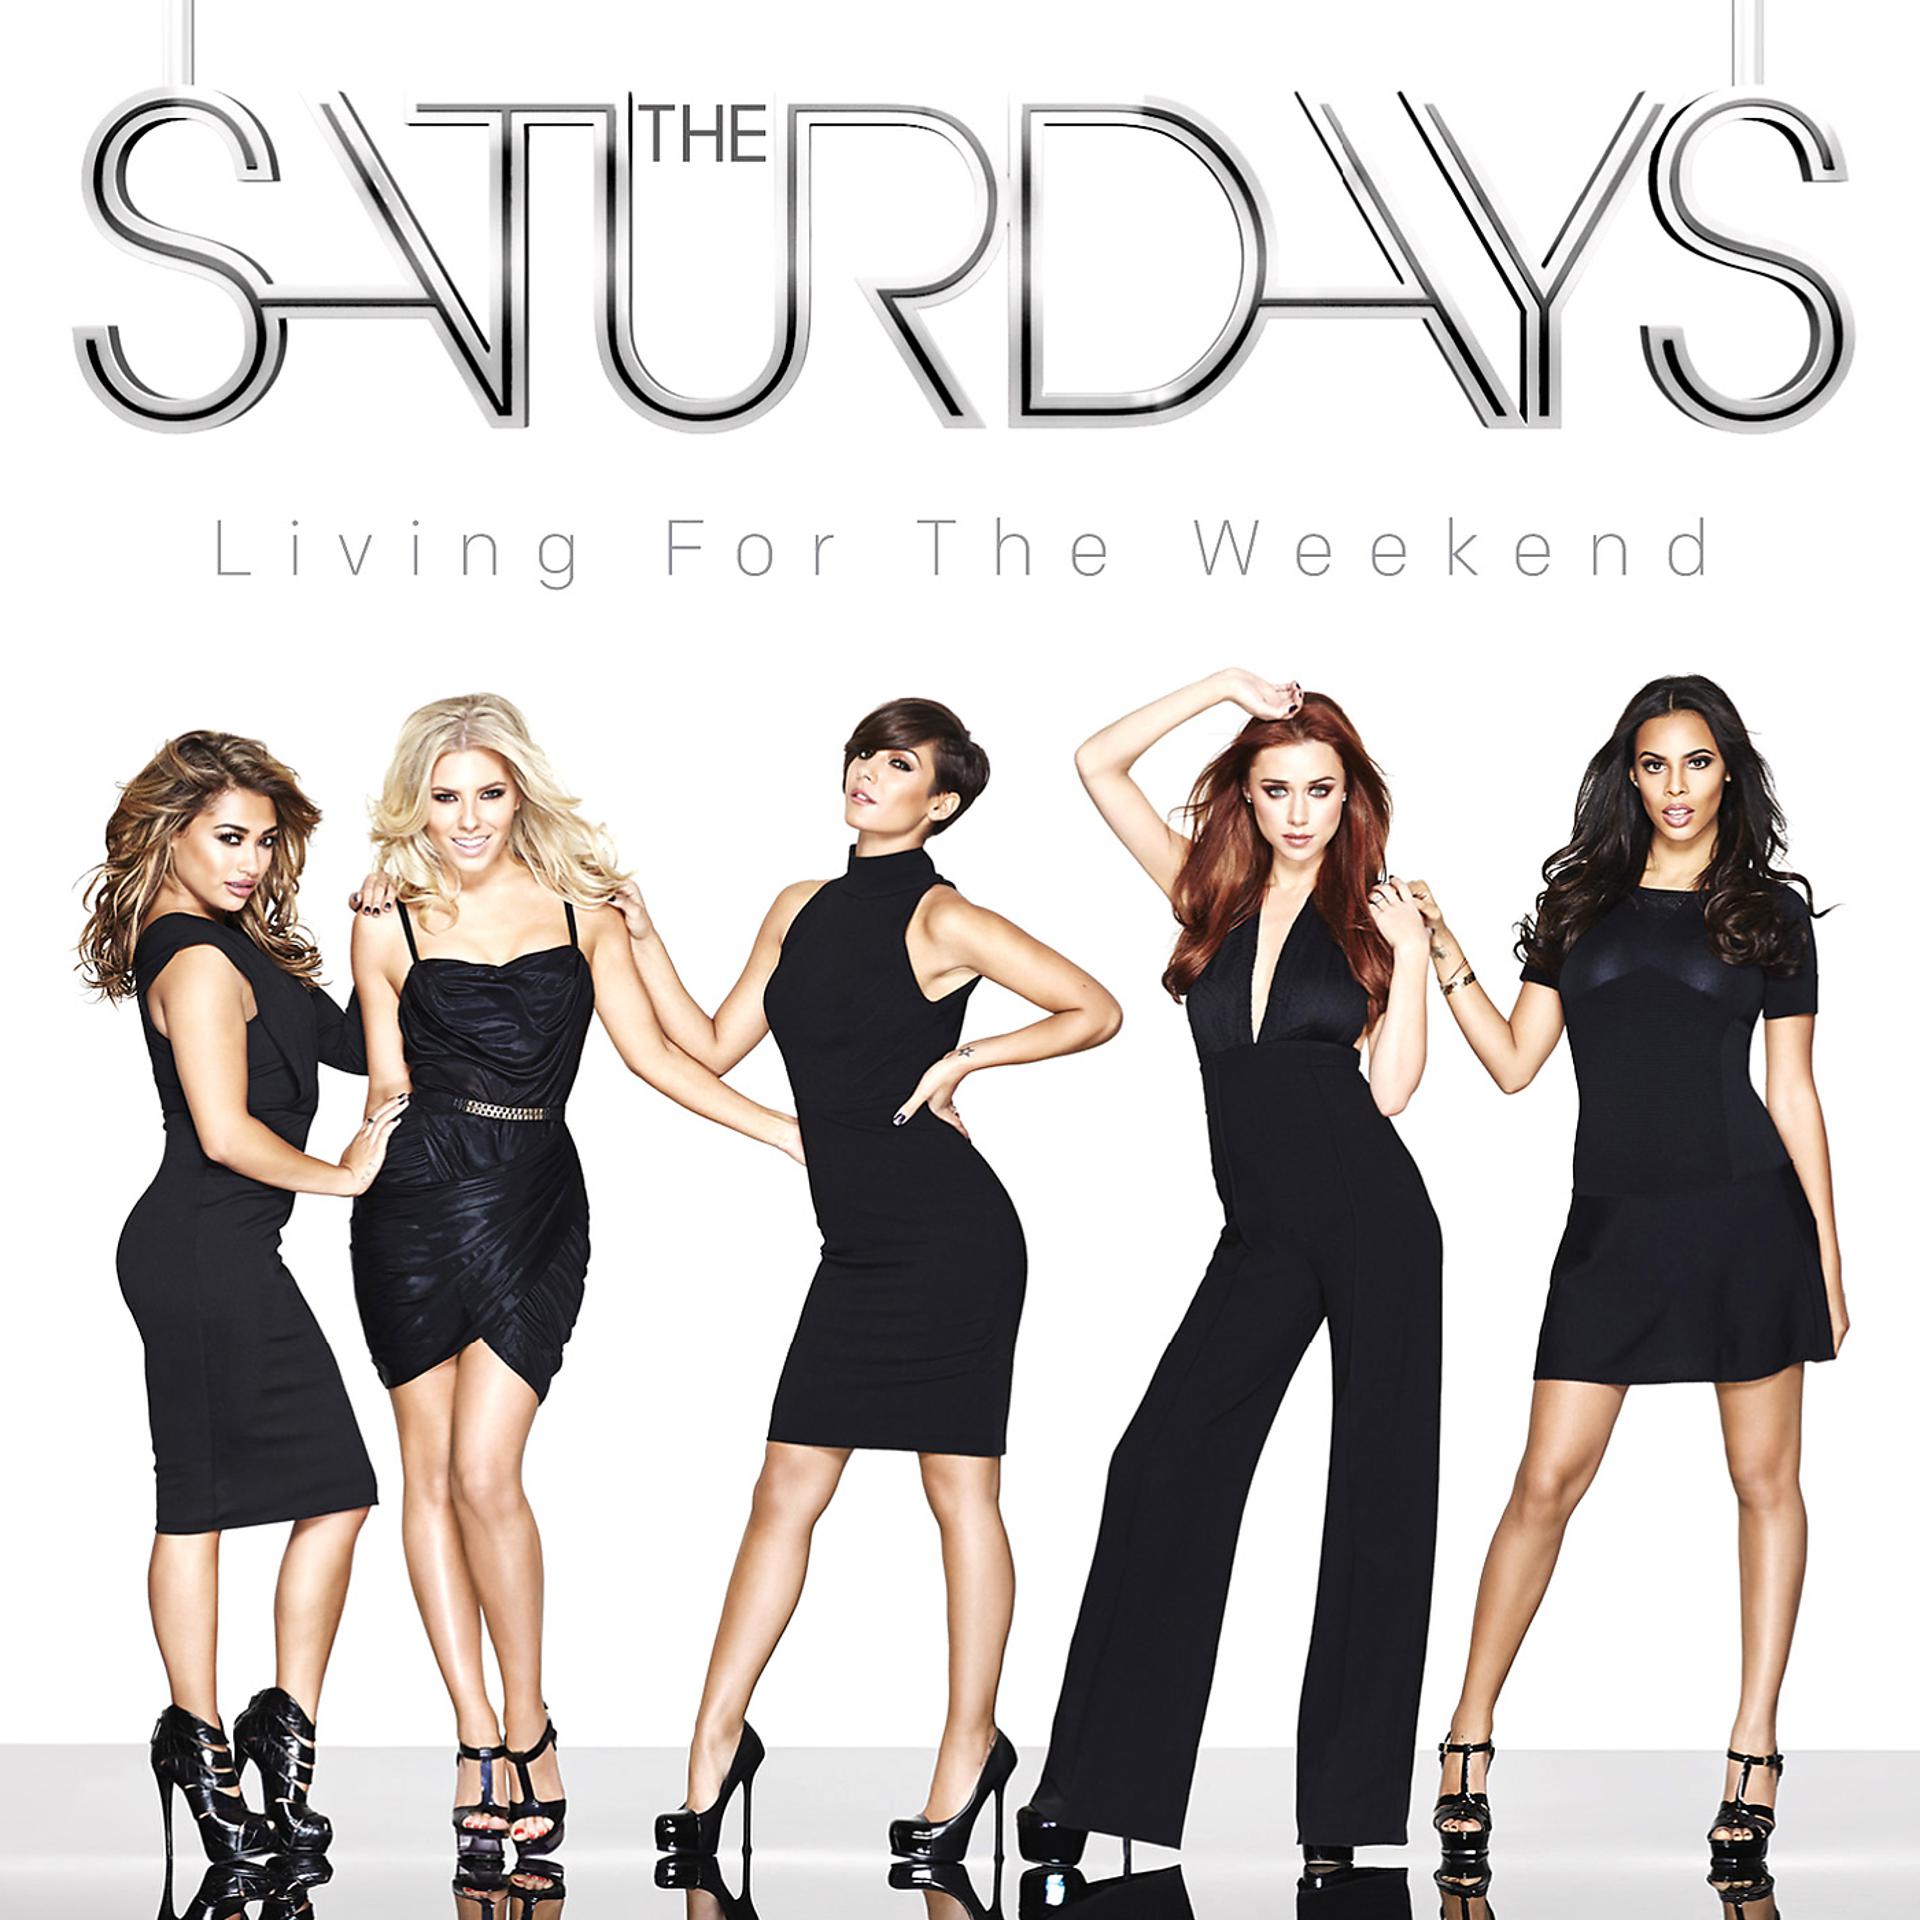 Where on saturdays. The Saturdays what about us.